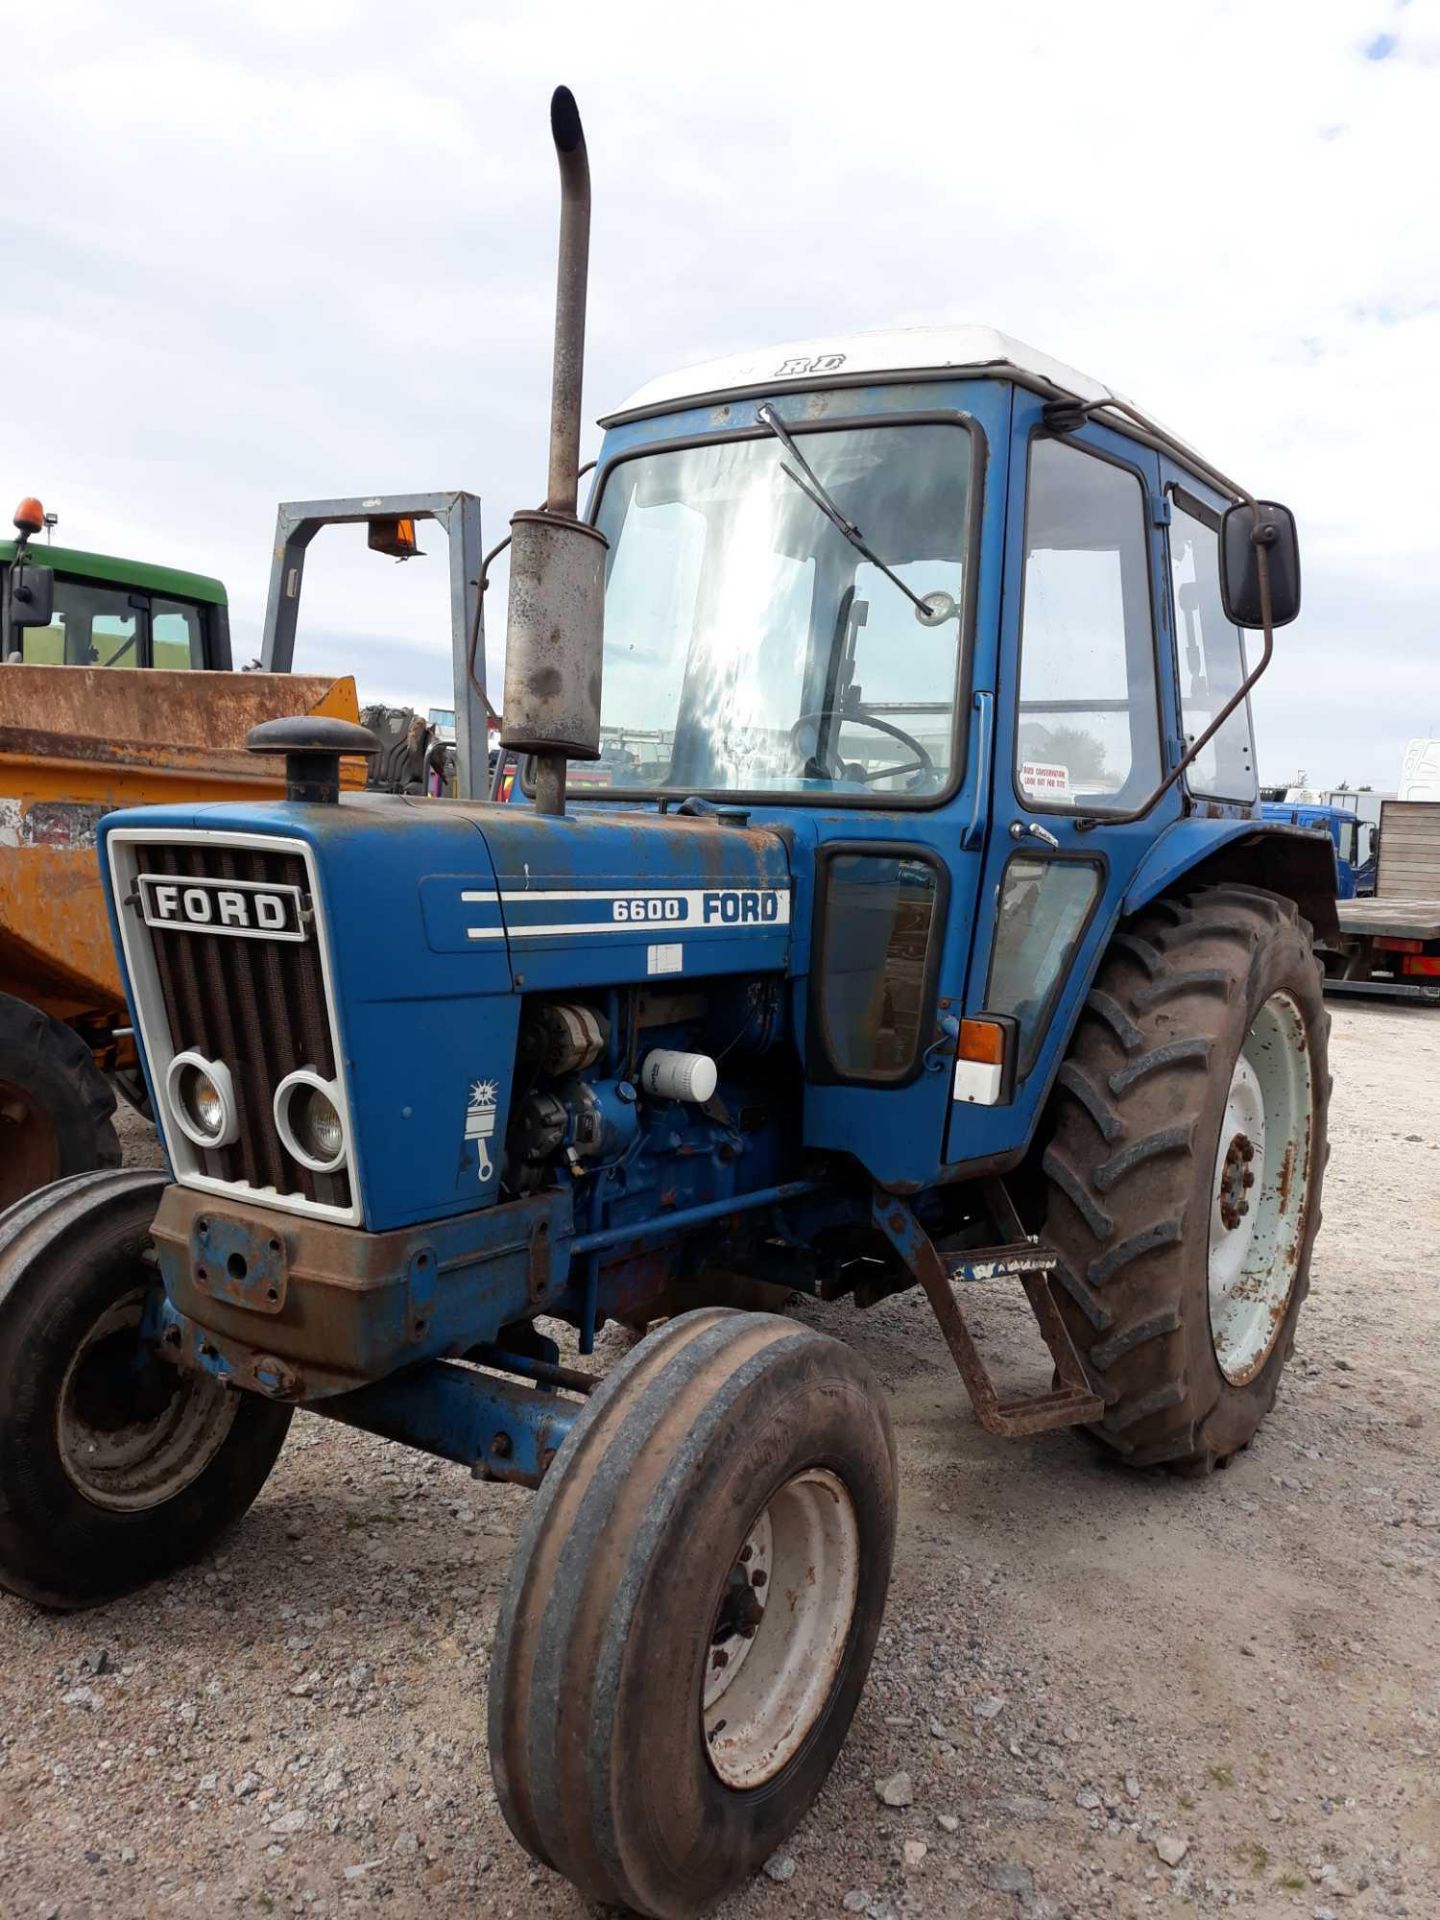 Ford Cargo 1615 - 0cc Tractor - Image 6 of 8